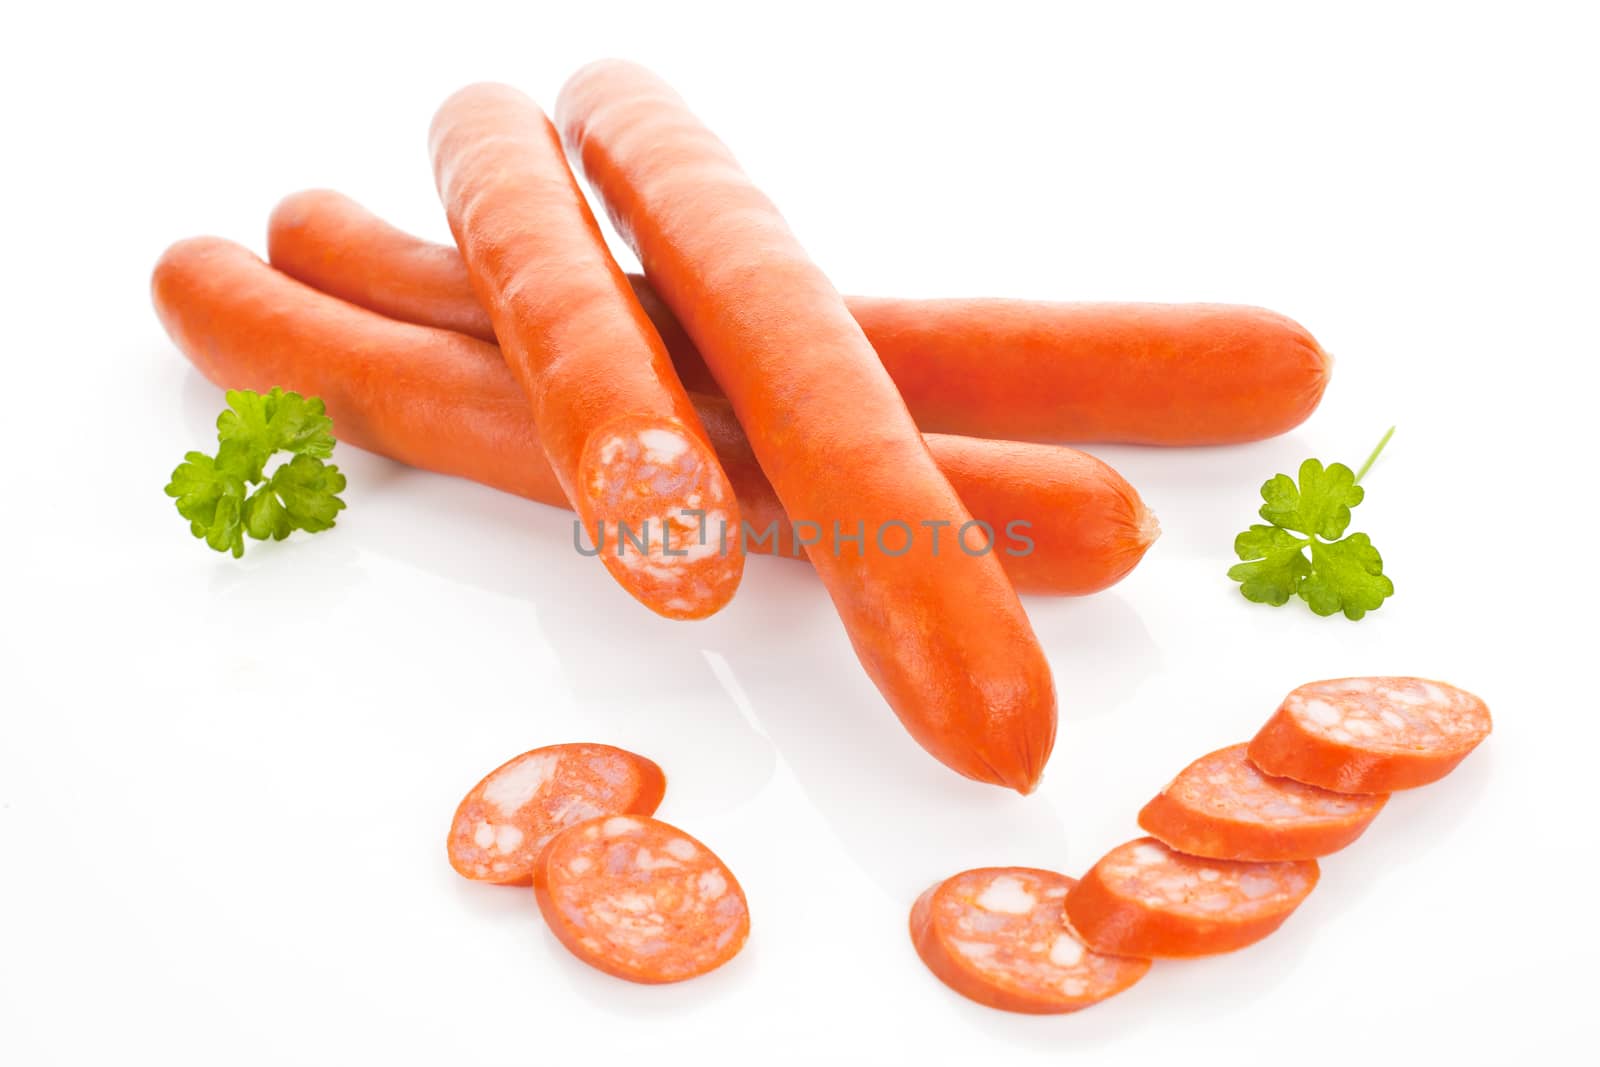 Luxurious sausages and slices isolated on white background. Unhealthy eating.